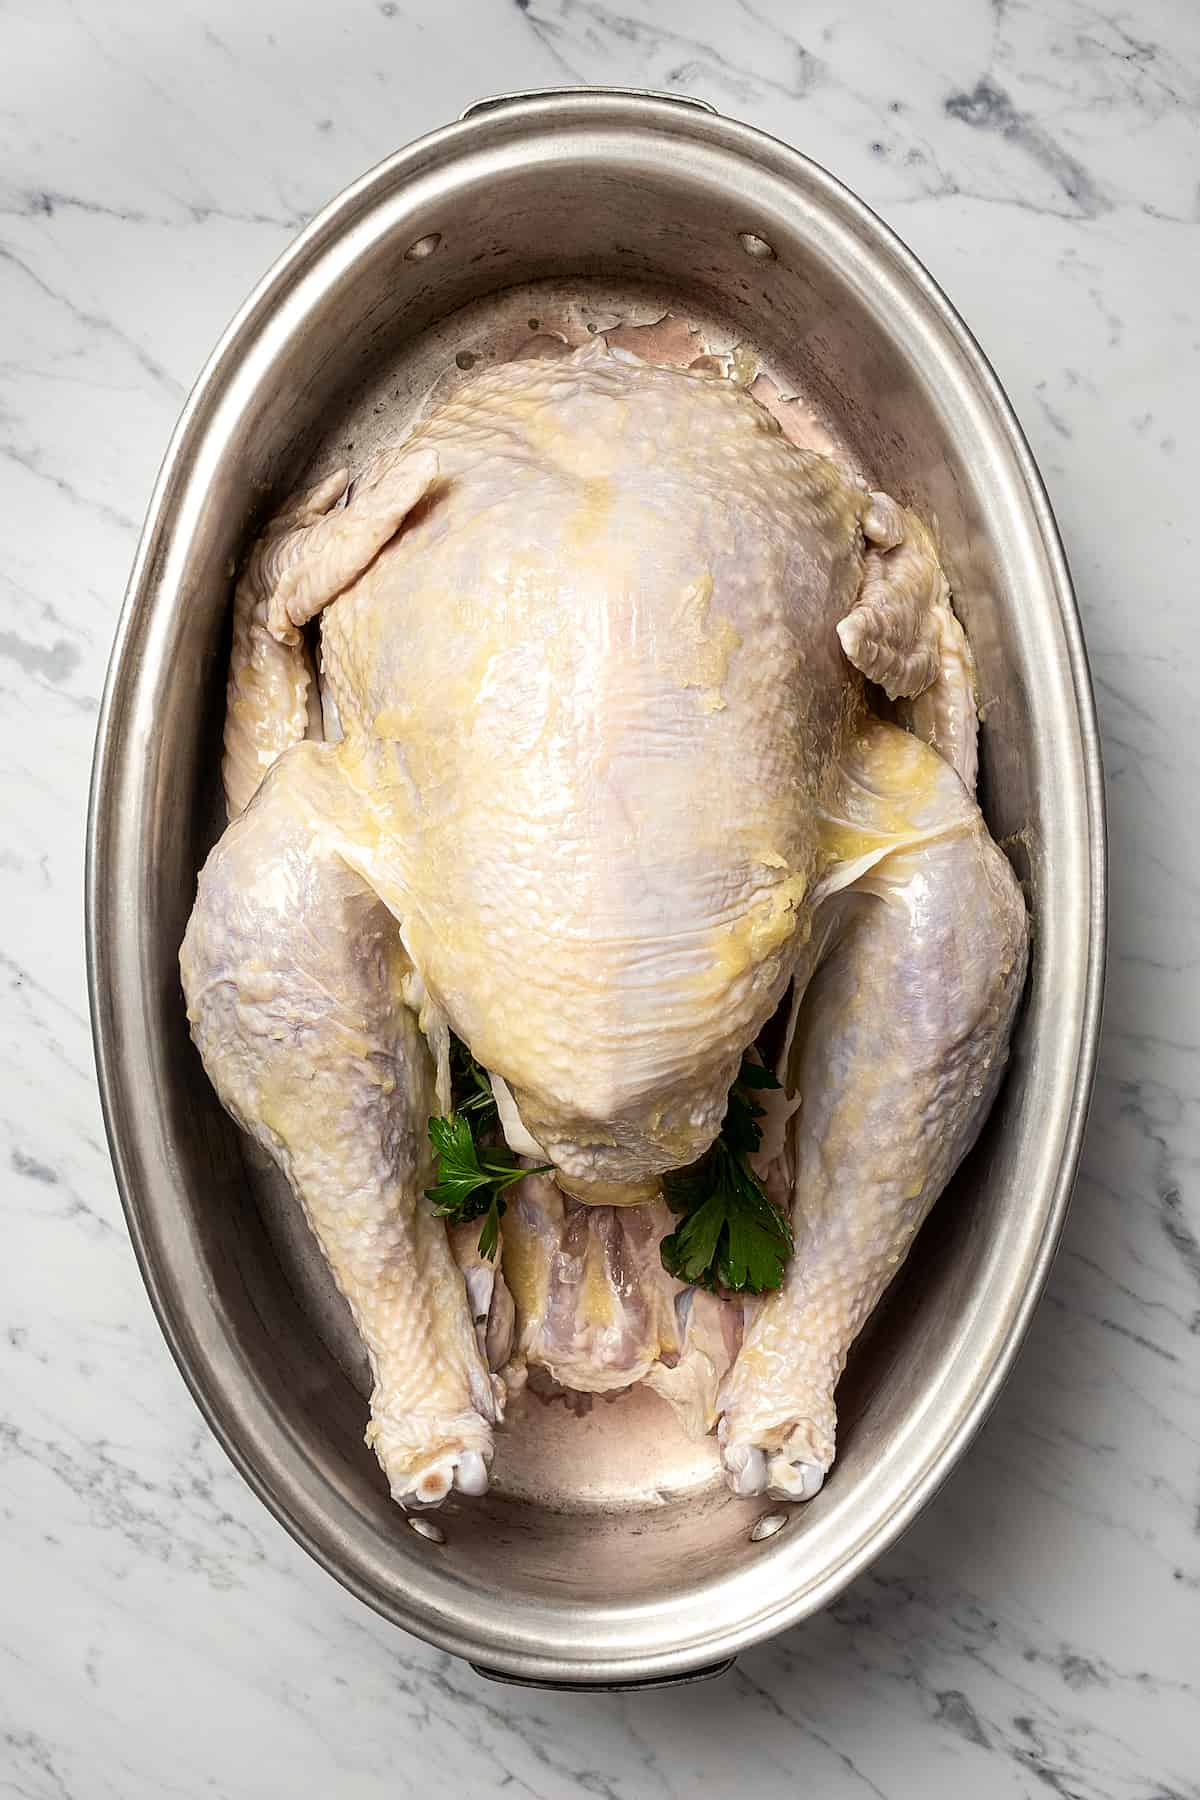 A whole turkey in a roasting pan, with aromatics in the cavity and butter brushed all over, ready for roasting.